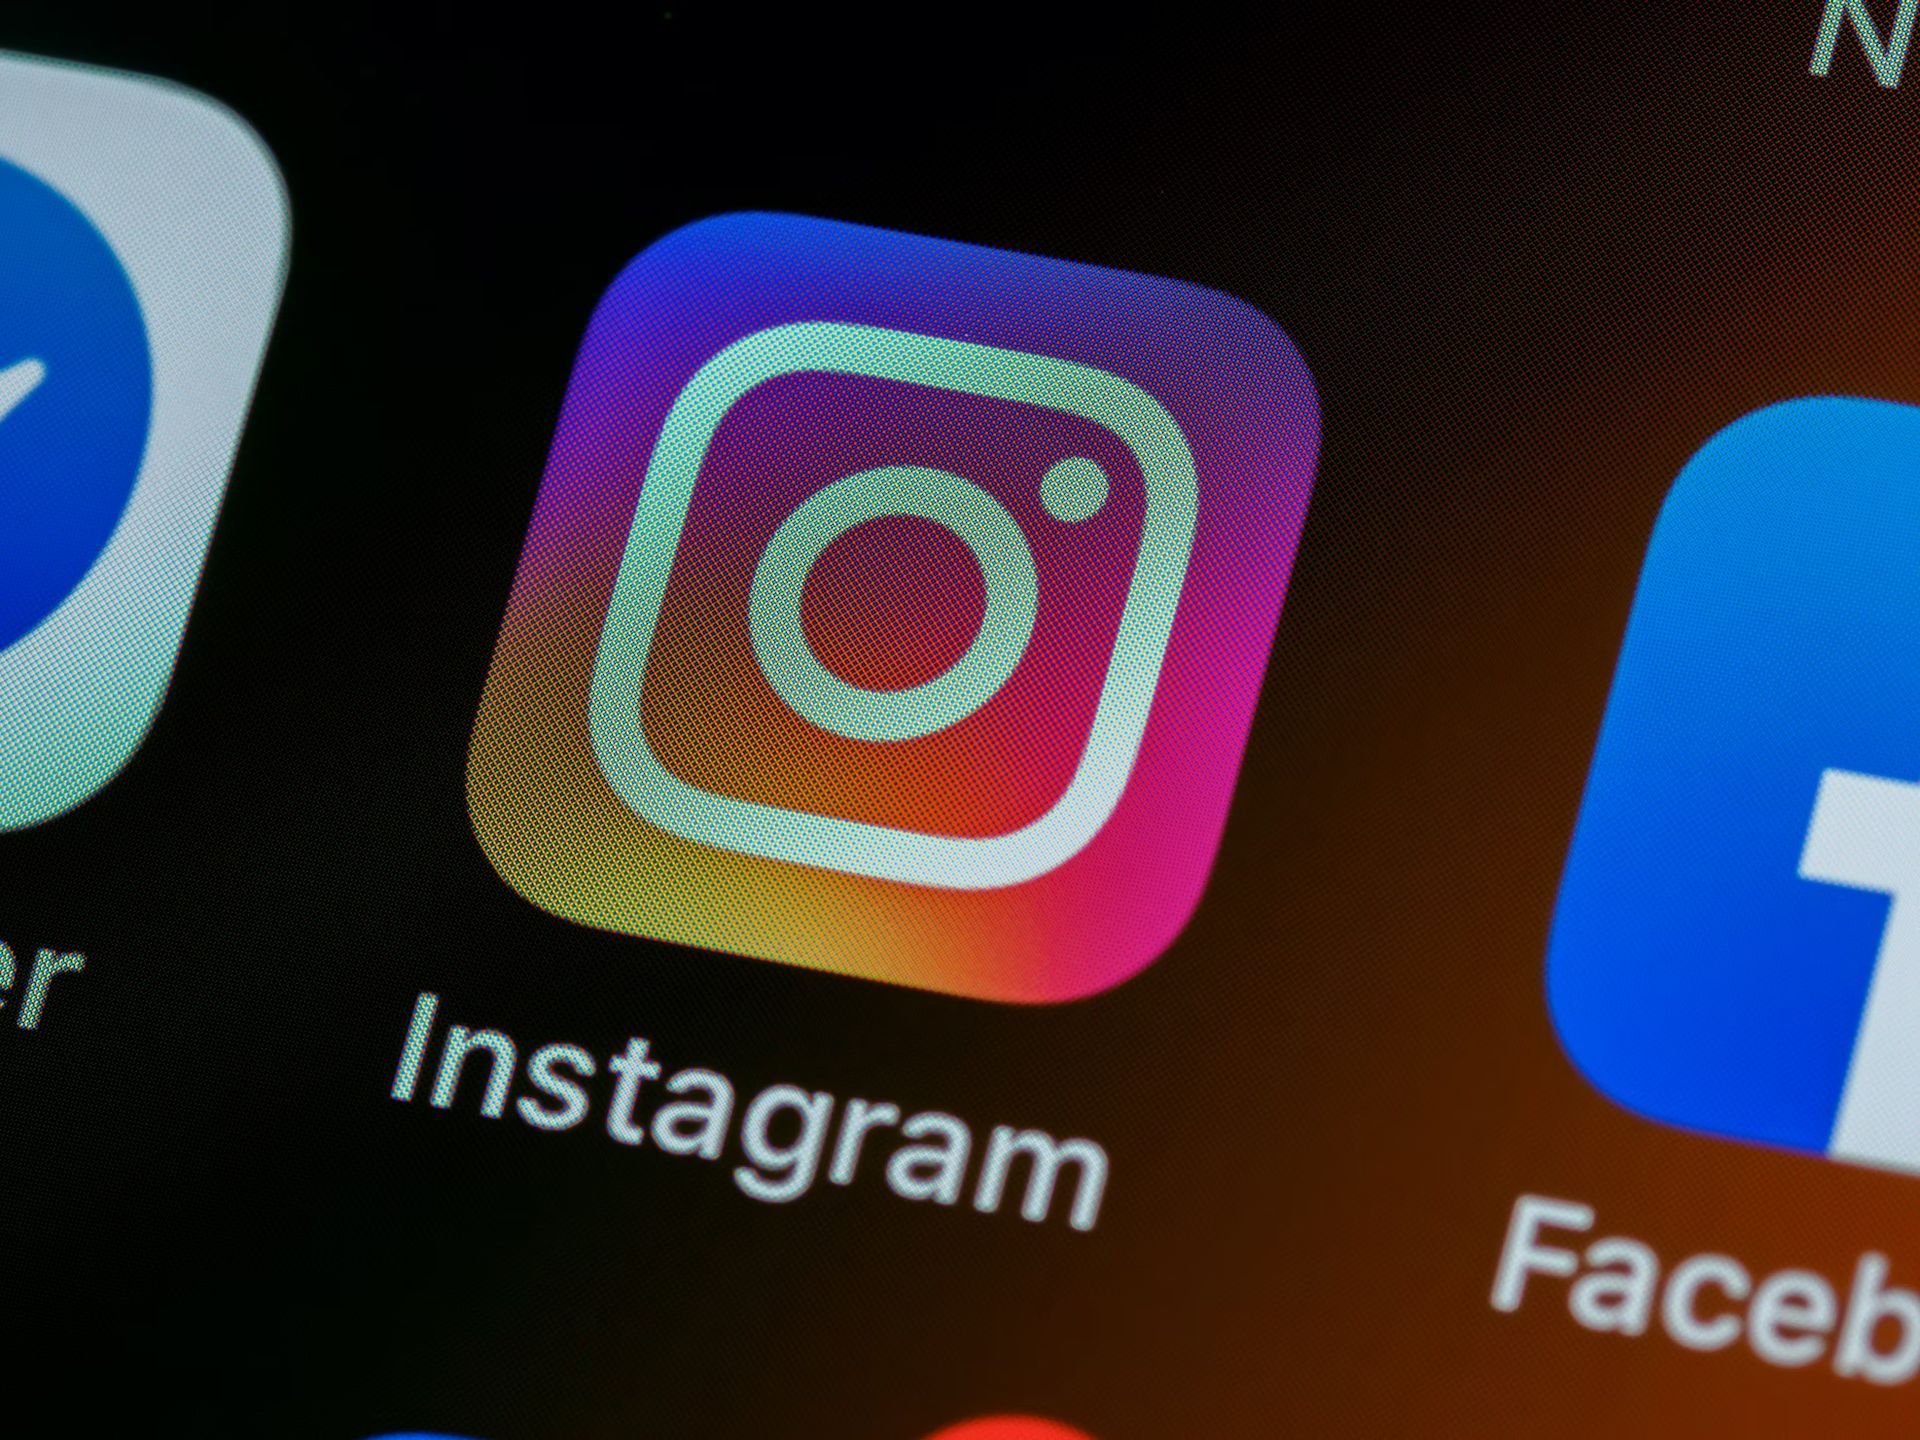 Instagram's upcoming AI tool is eagerly anticipated